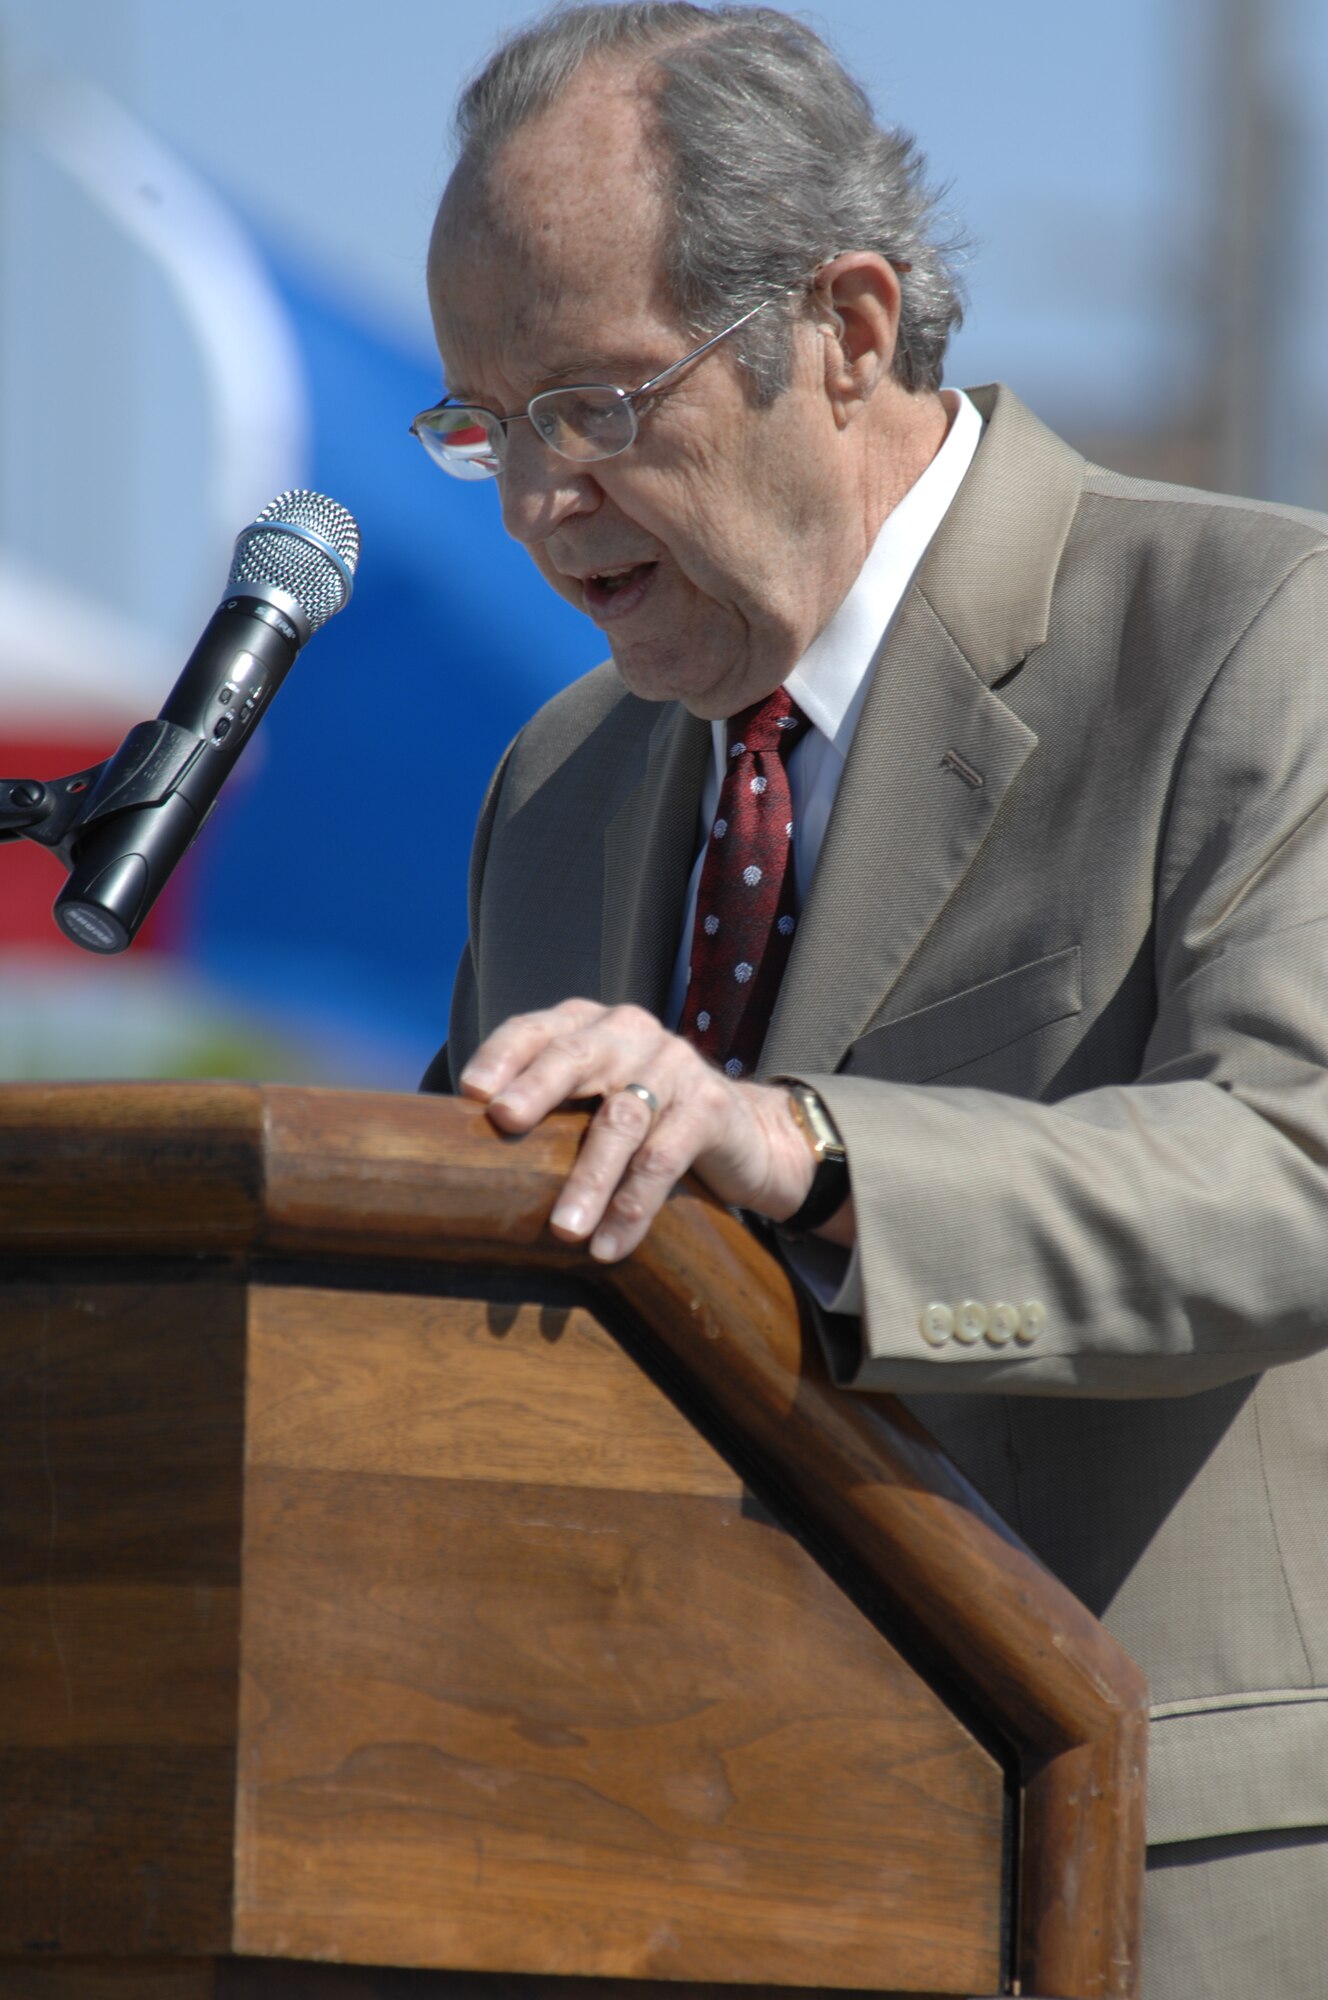 HOLLOMAN AIR FORCE BASE, N.M.--Dr. William Perry, guest speaker, gives a speech during the Sunset Stealth retirement ceremony April 21, 2008, here at Heritage Park. In 1997, Dr. Perry became the undersecretary of defense for research and engineering where he worked on missile and stealth development. He was sworn in as Secretary of Defense on Feb. 3, 1994, and remained in that position until 1997. (U.S. Air Force photo/Airman 1st Class Jamal D. Sutter)